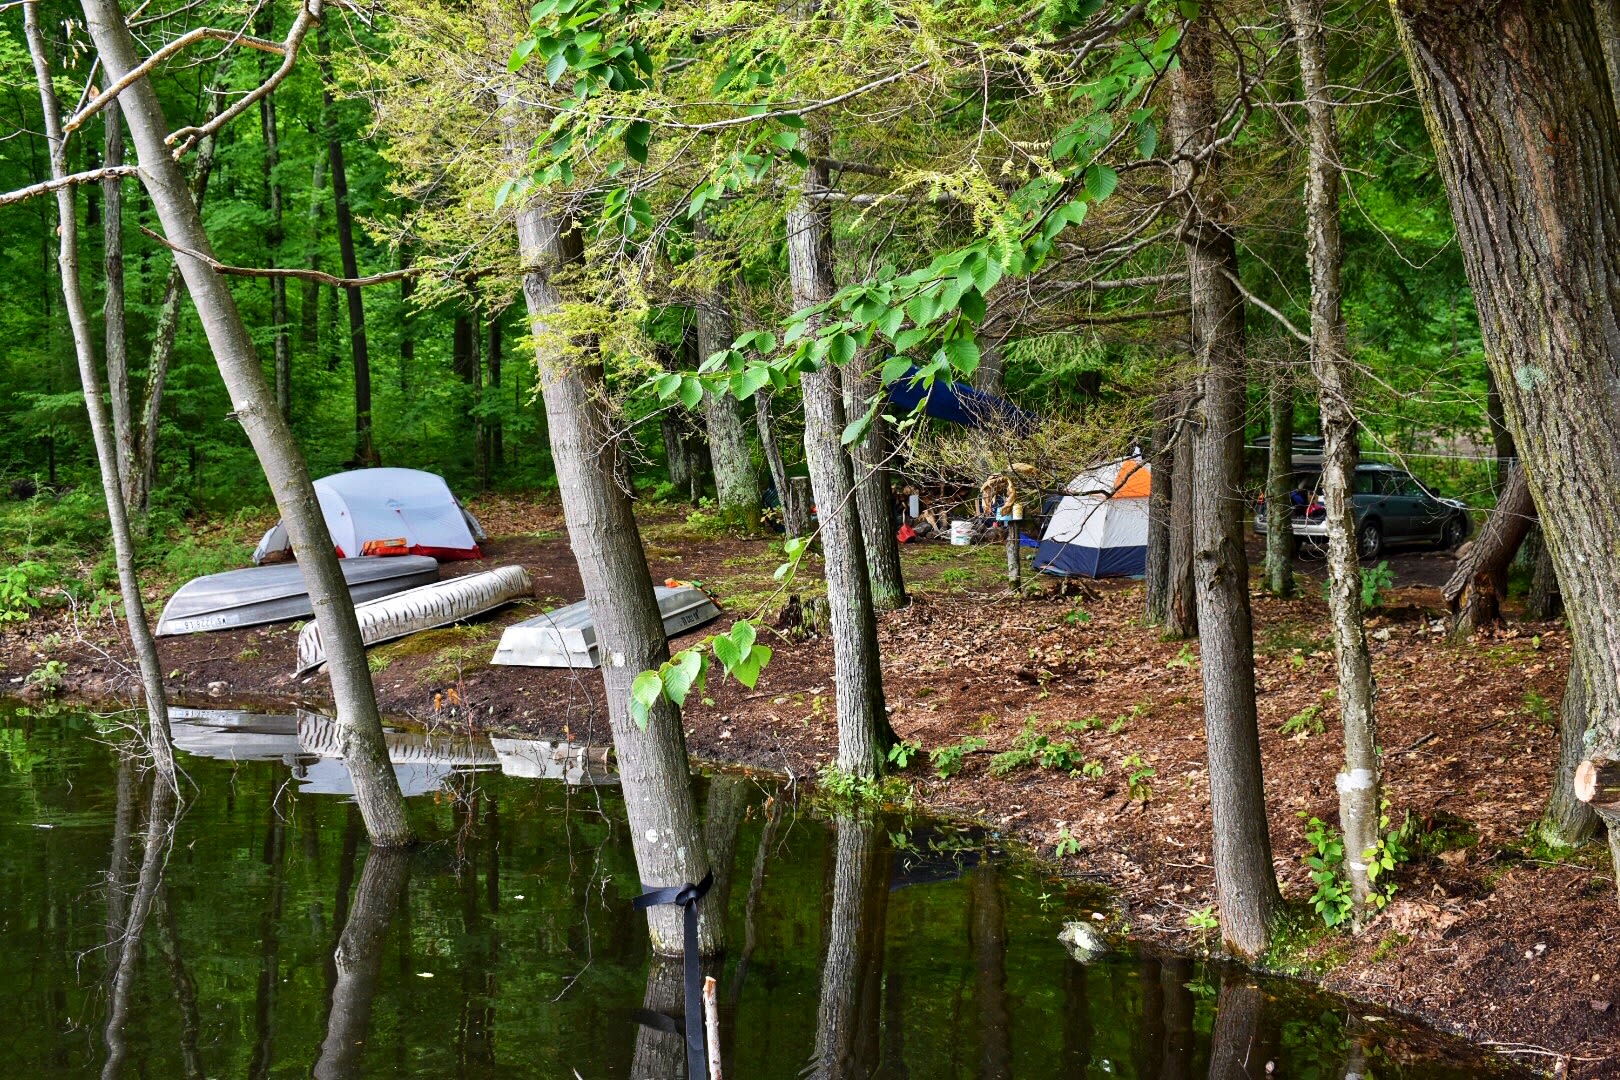 View of the campsite from the dock